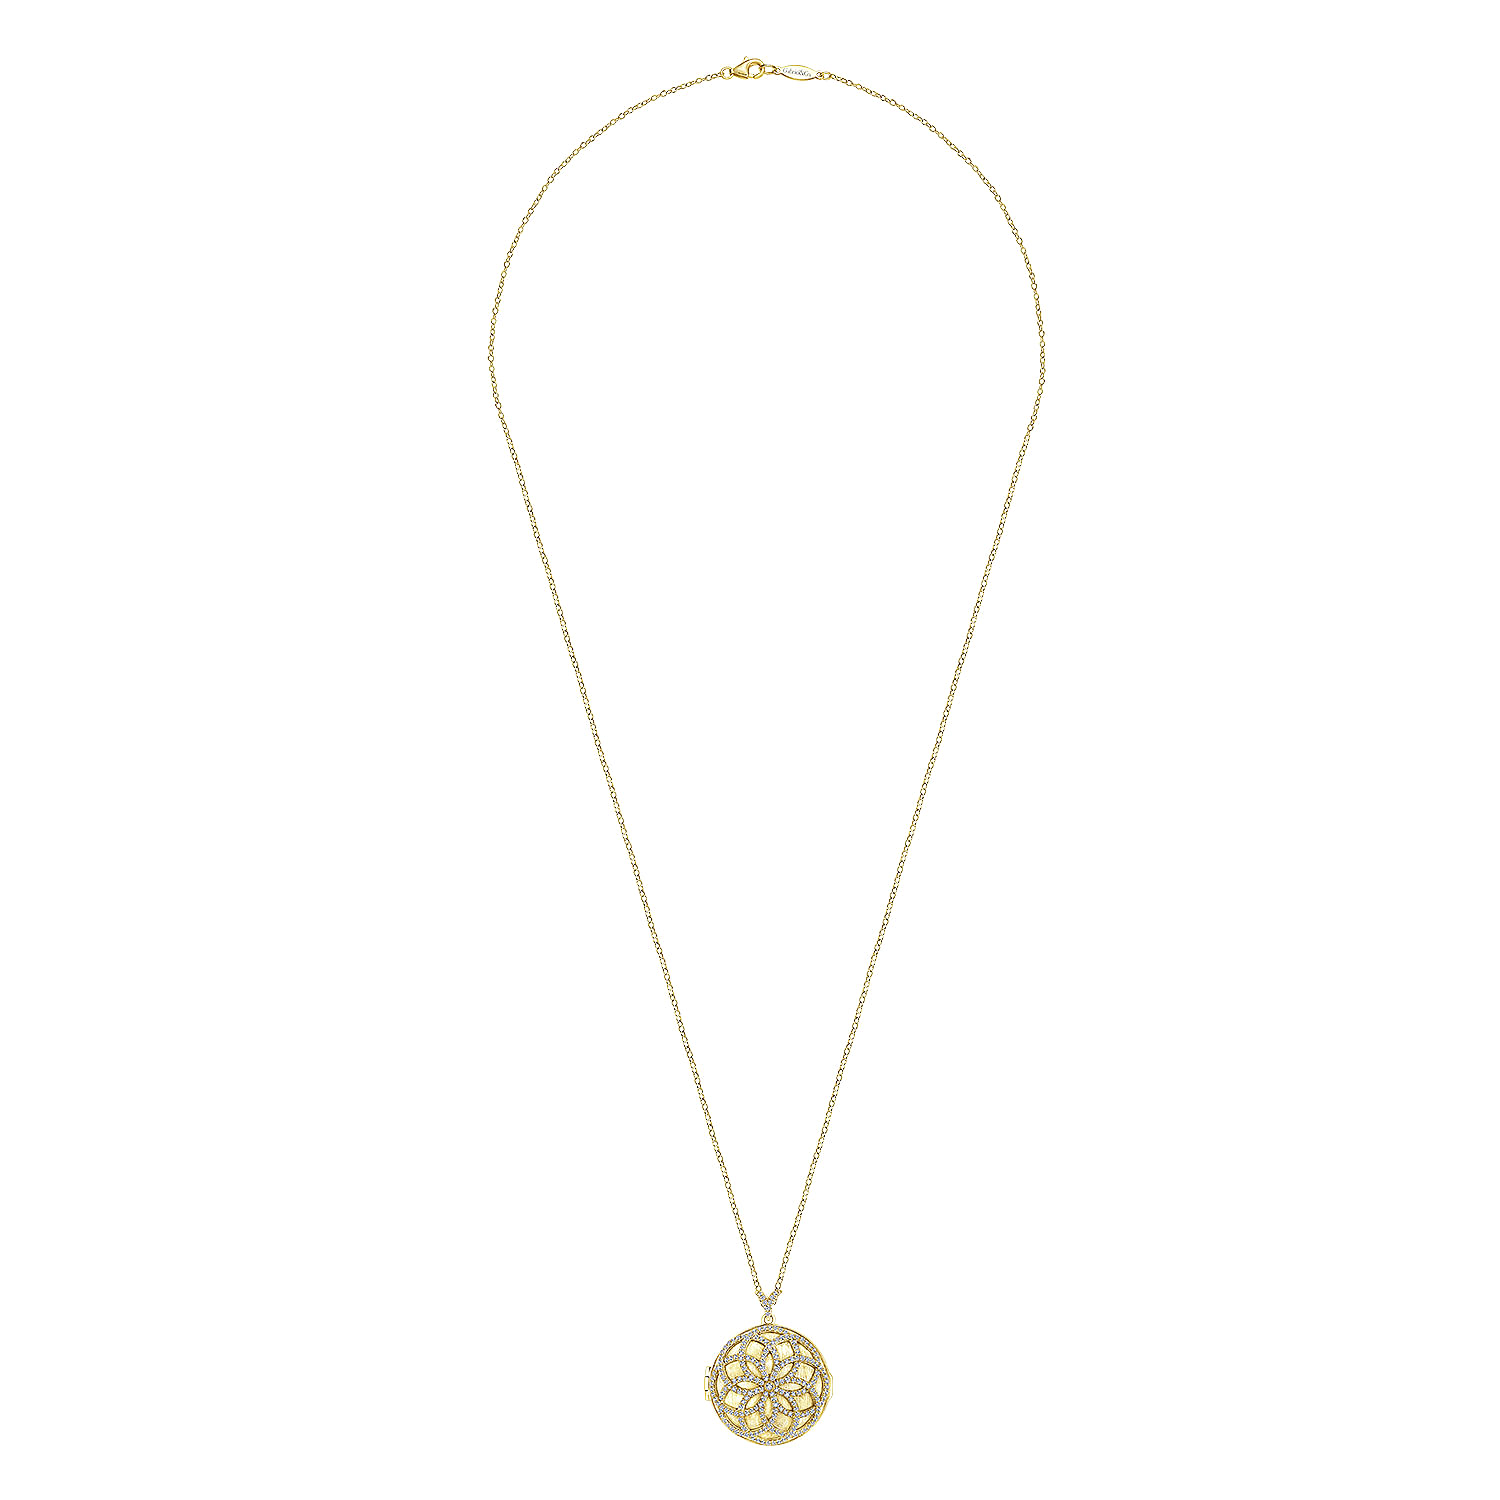 25 inch 14K Yellow Gold Locket Necklace with Floral Diamond Overlay